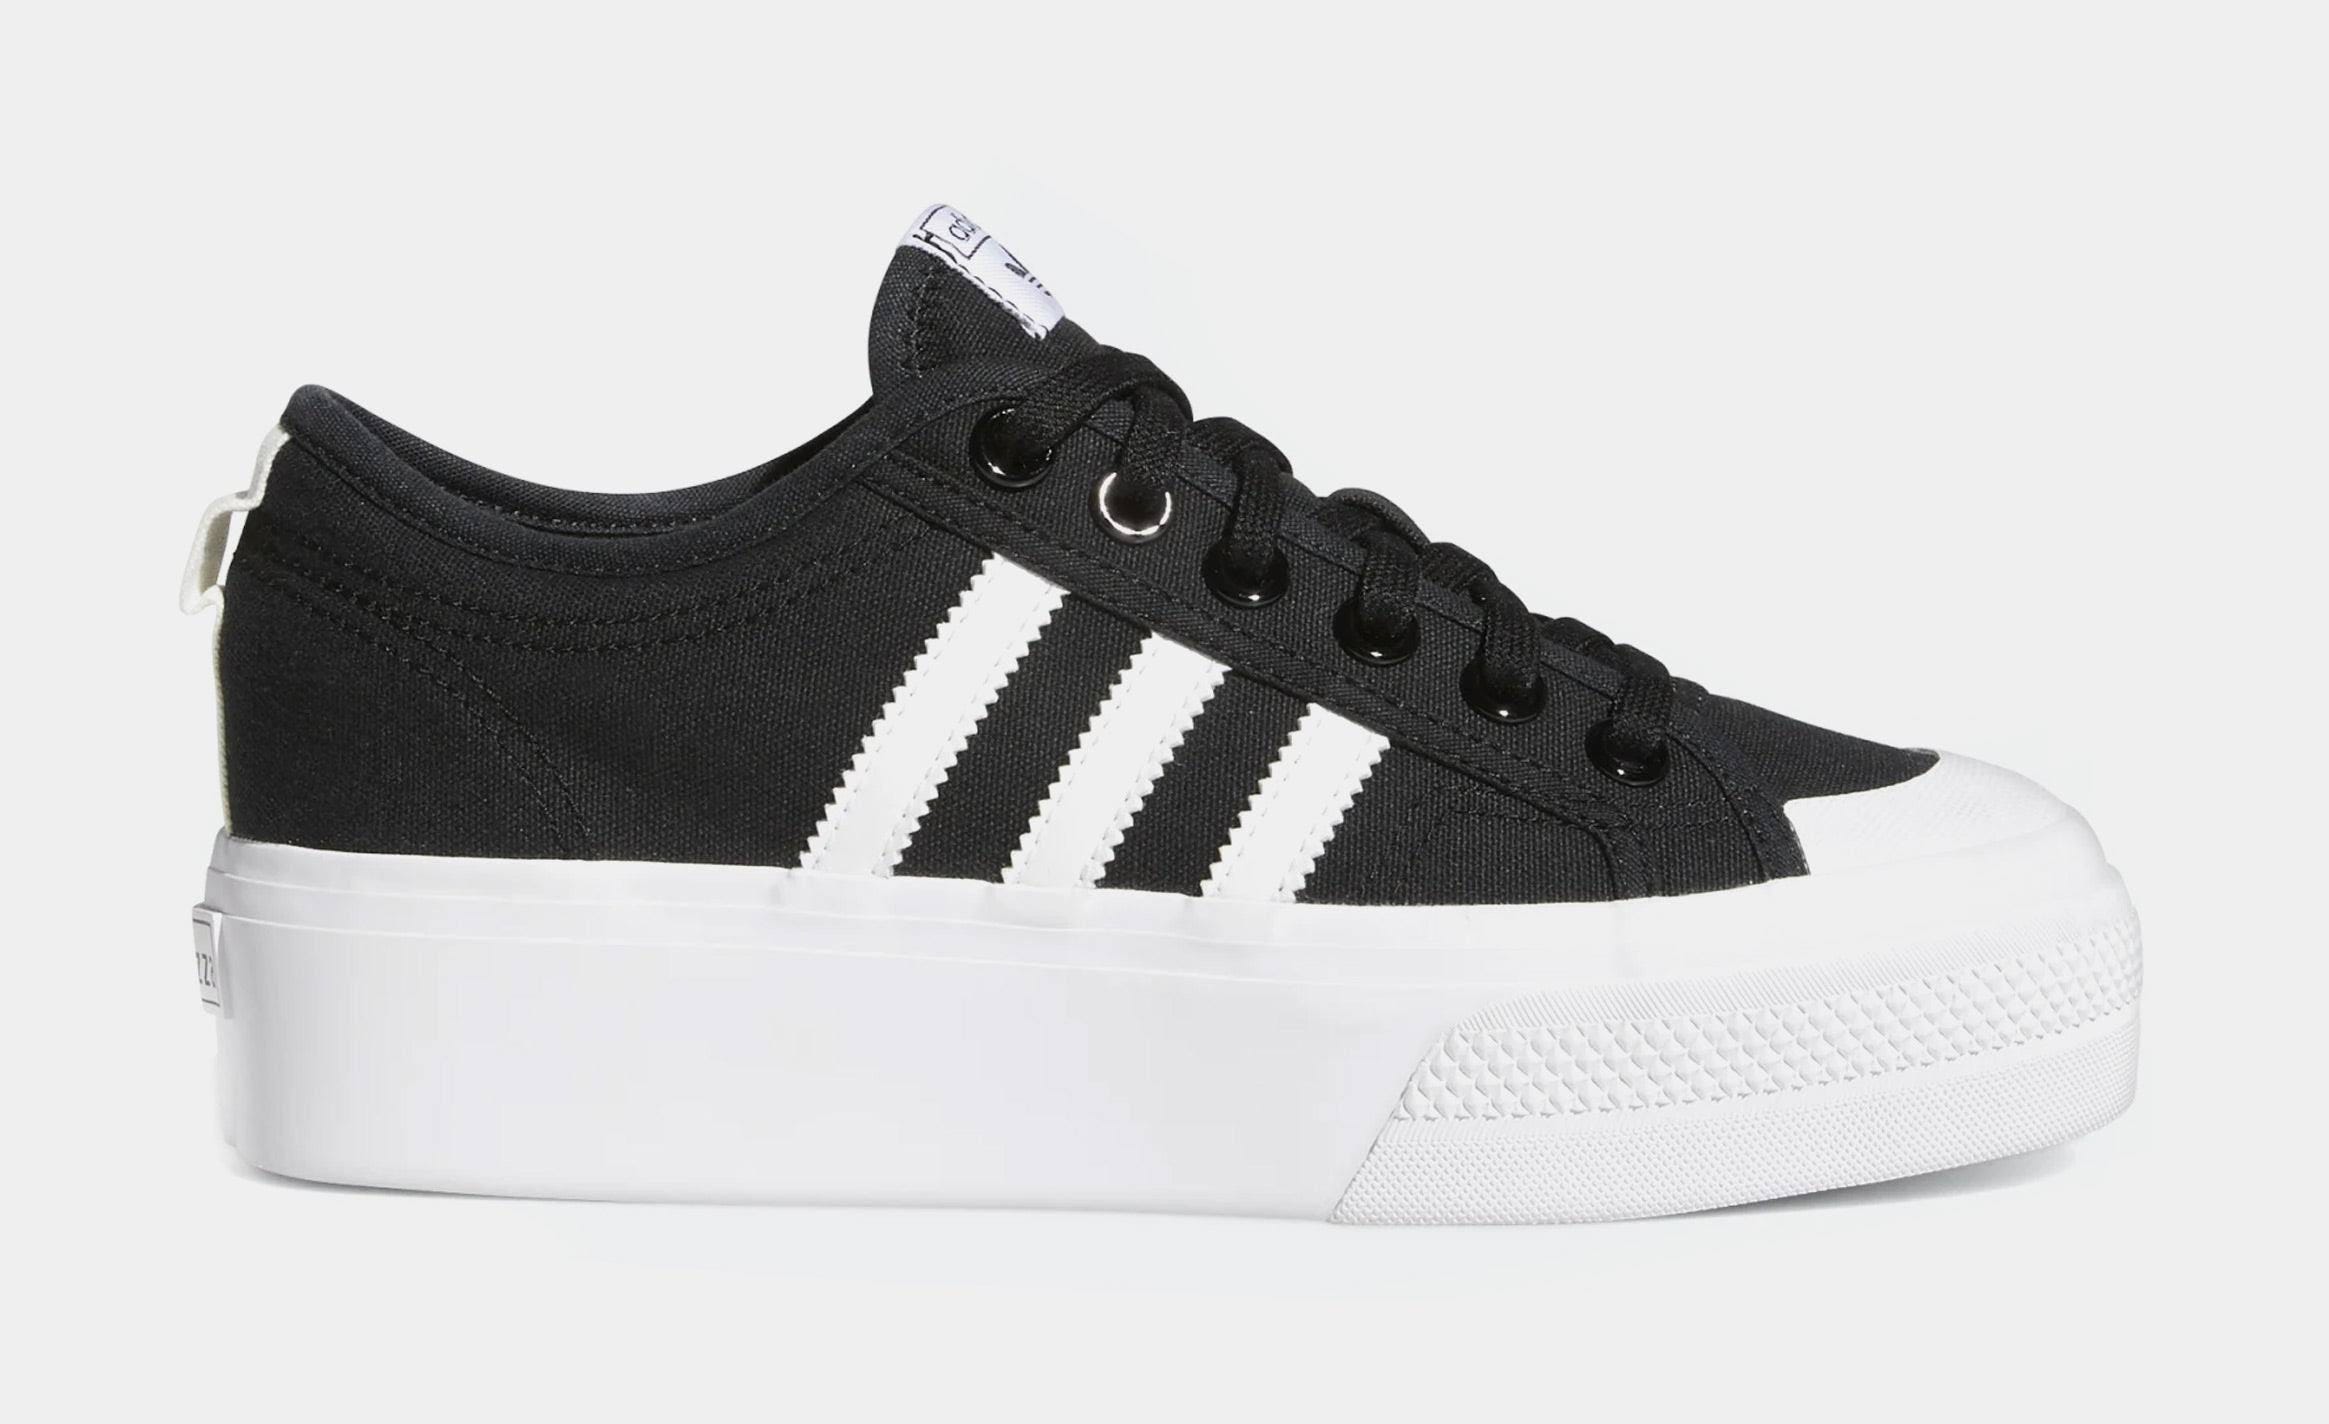 Comfortable and Stylish Adidas Originals Nizza Platform Sneakers for Women | Image